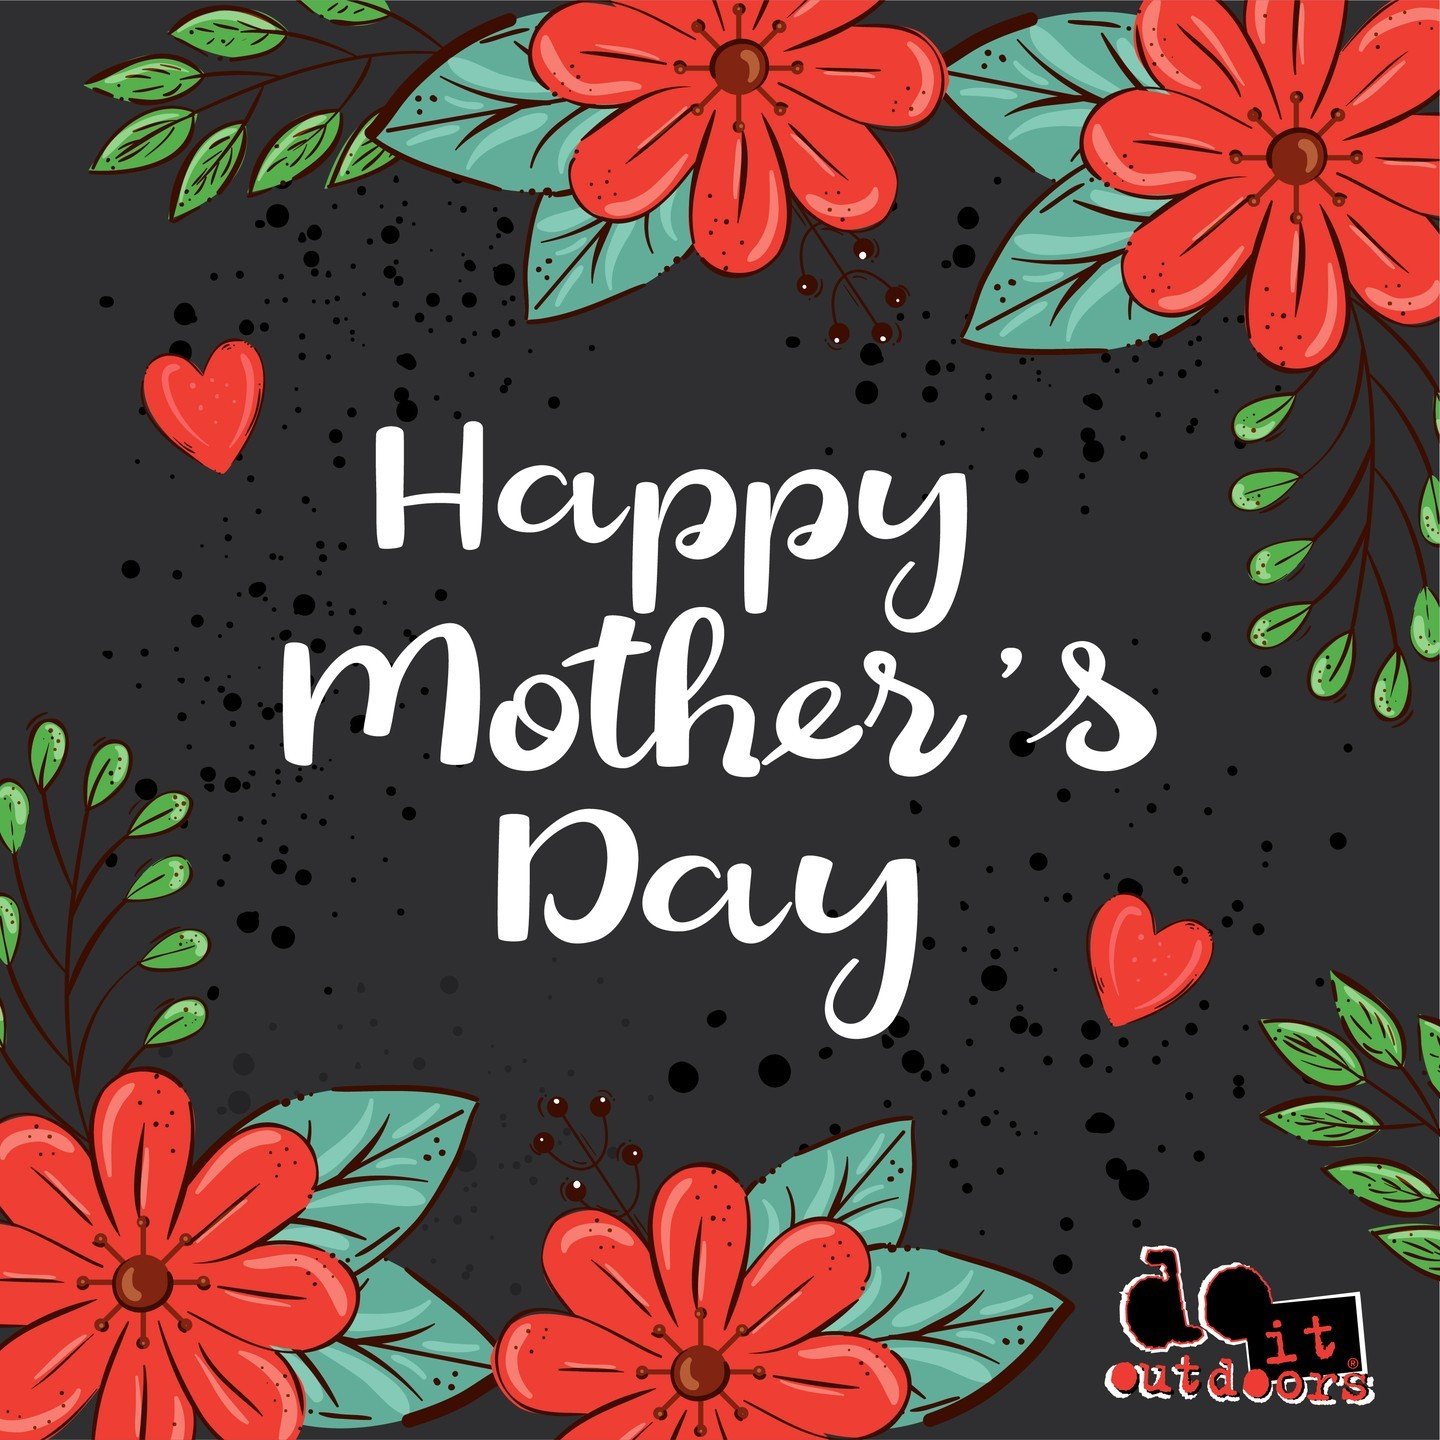 💐 Happy Mother's Day to all the incredible moms out there! Thank you for your endless love and strength. Today, we celebrate you! 🌟 

#MothersDay